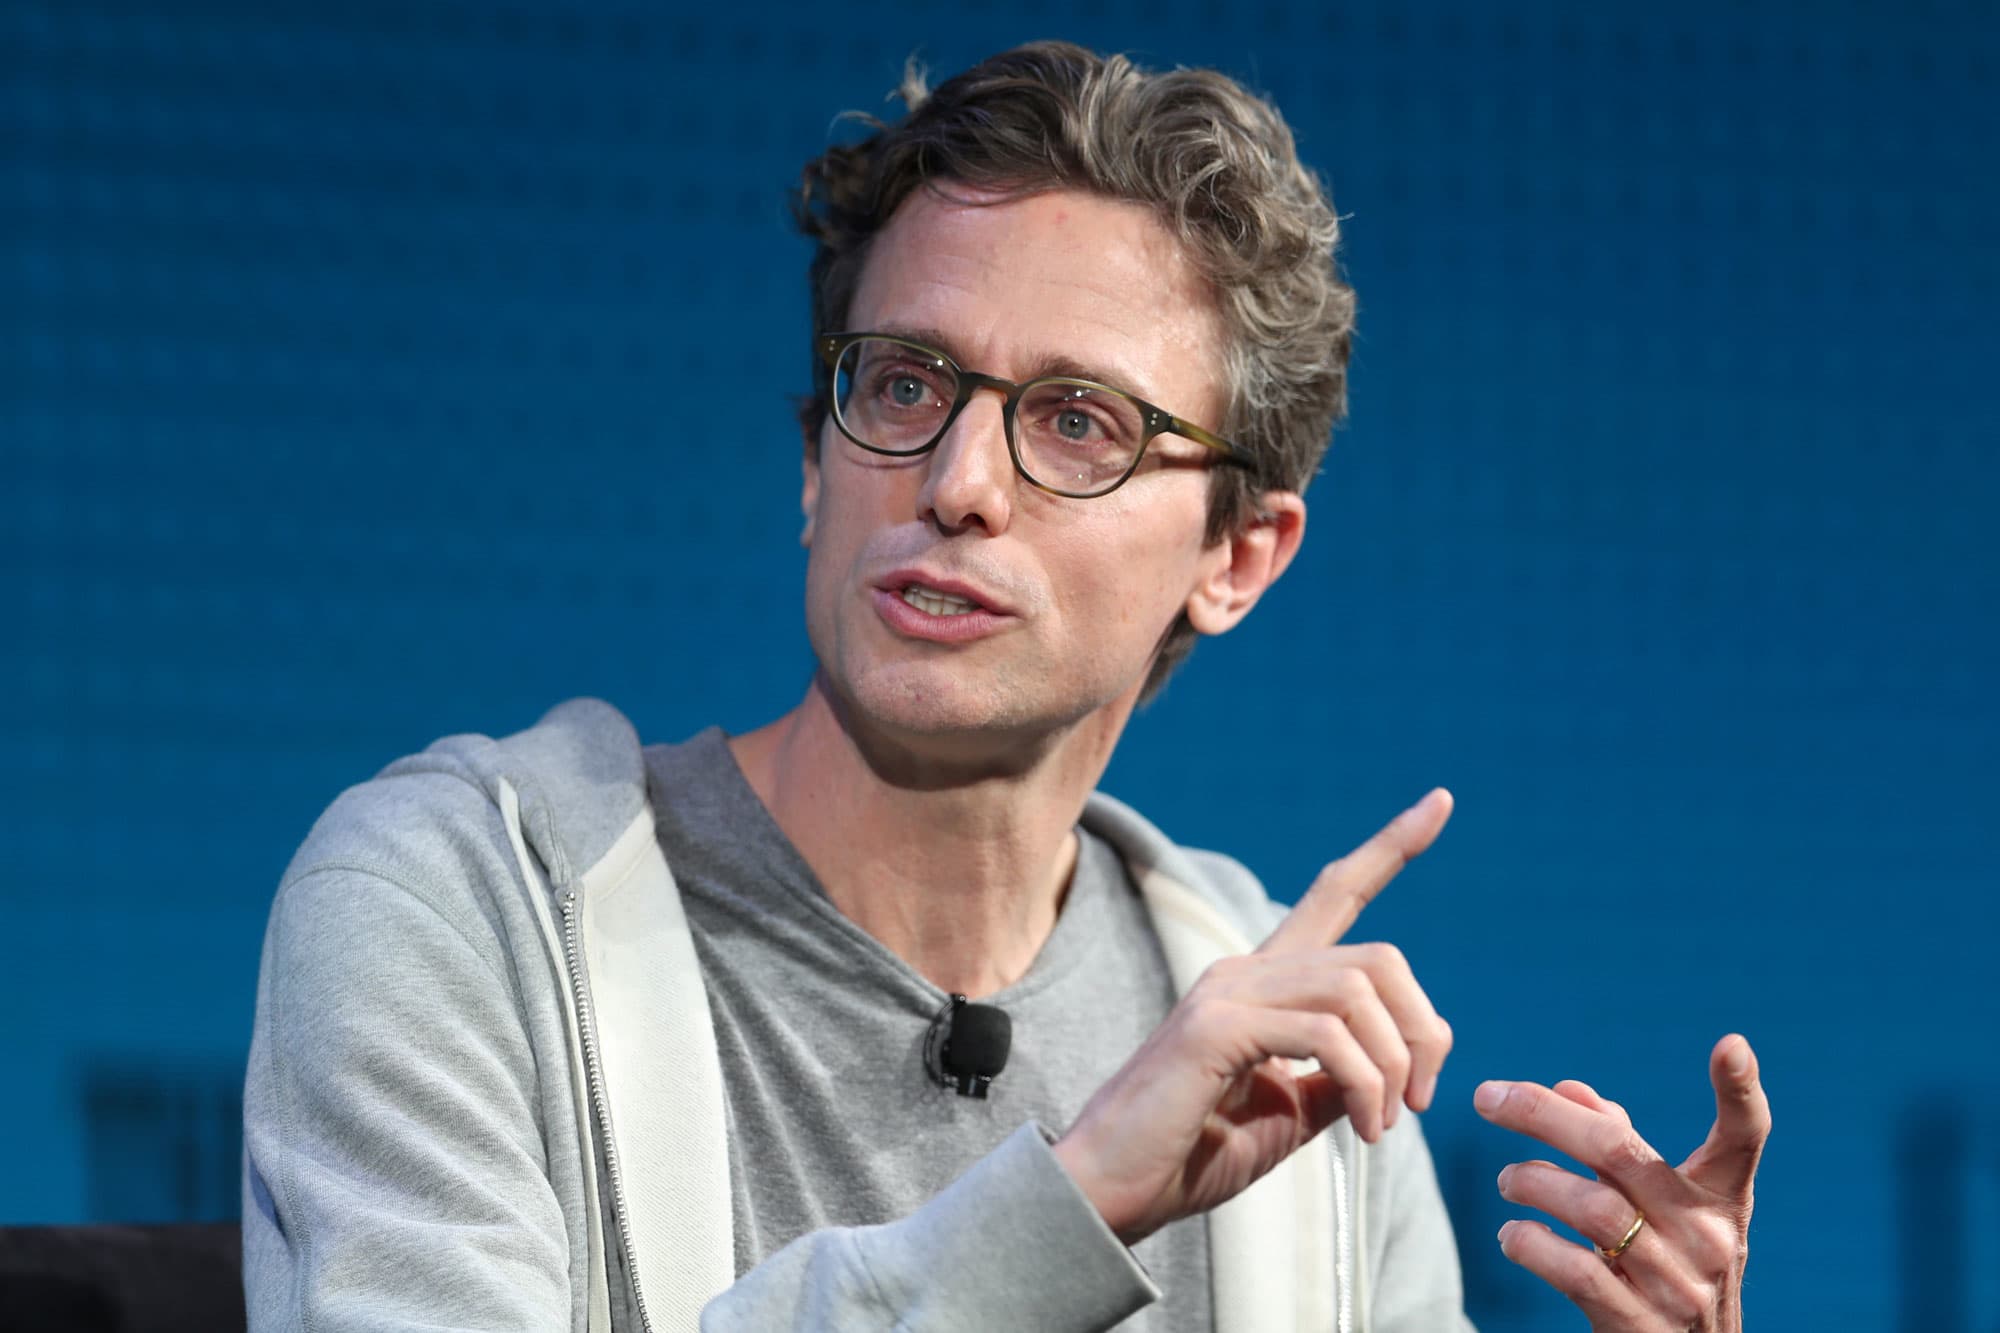 BuzzFeed announces plans to go public via SPAC merger, targeting a $1.5B valuation, and will acquire digital publisher Complex Networks for $300M (Jessica Bursztynsky/CNBC)